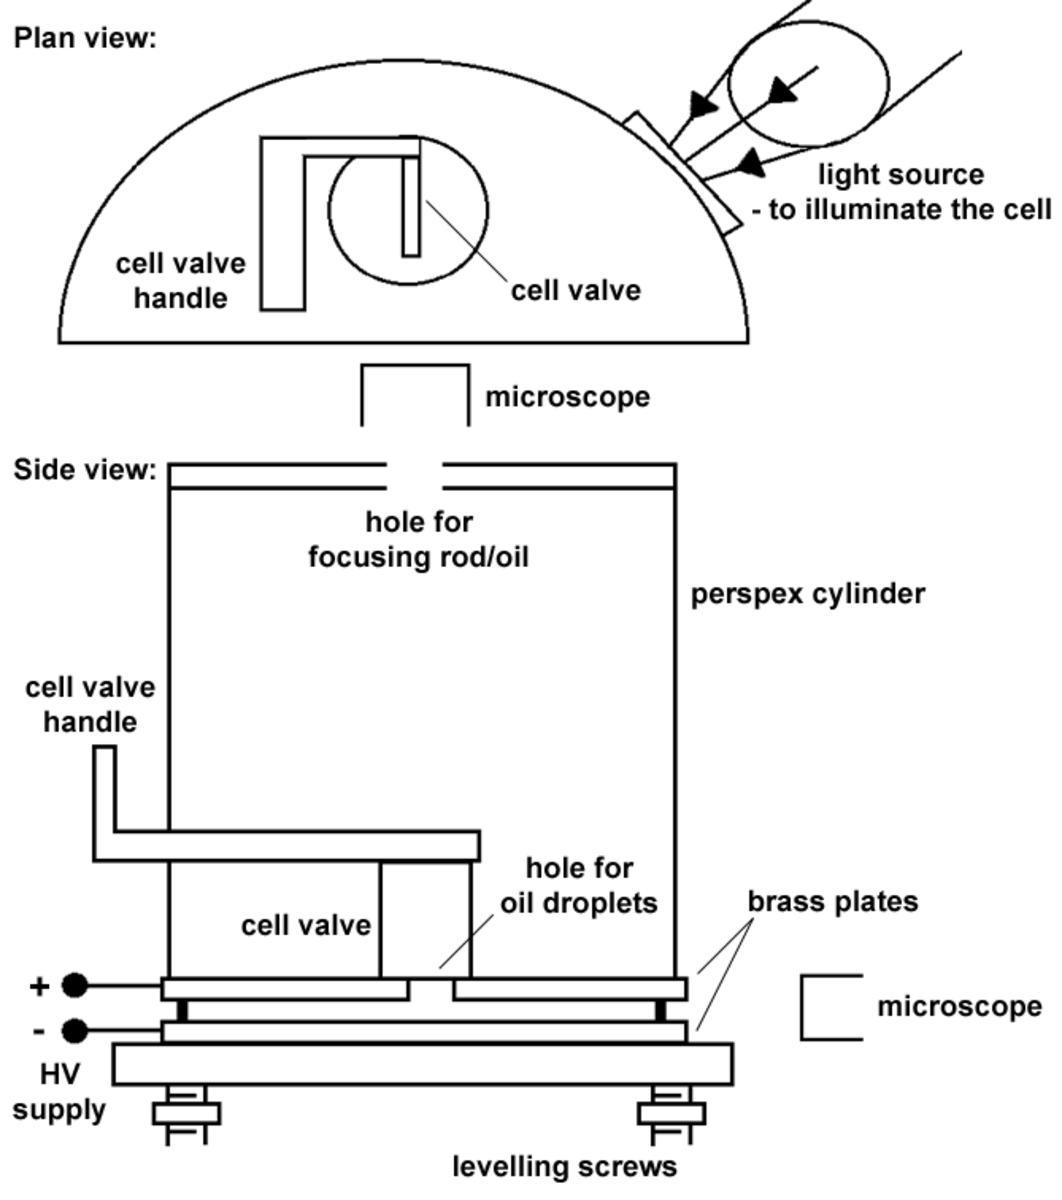 The apparatus used for Millikan's experiment (shown from two perspectives).